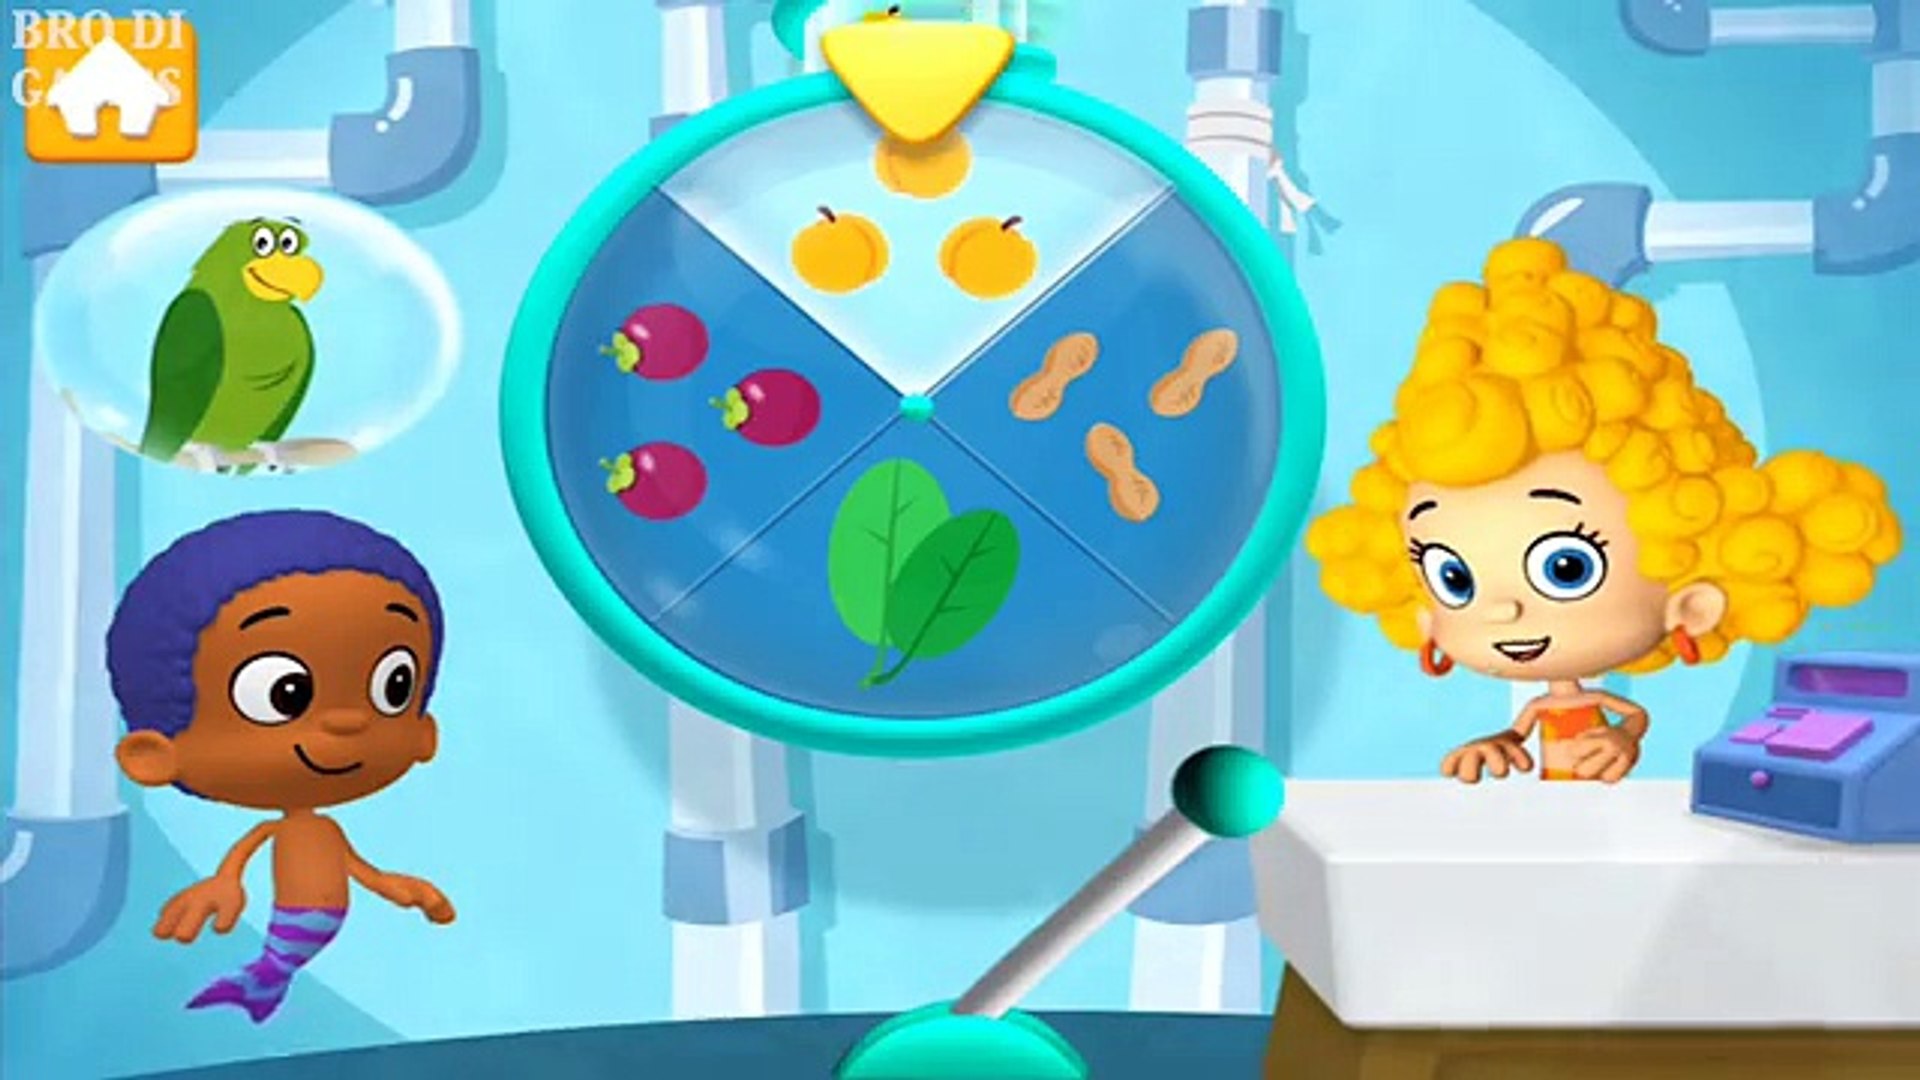 Bubble Guppies Episodes Learn Animals School Day Full Episode parrot videos  for kids #BRODIGAMES - Dailymotion Video